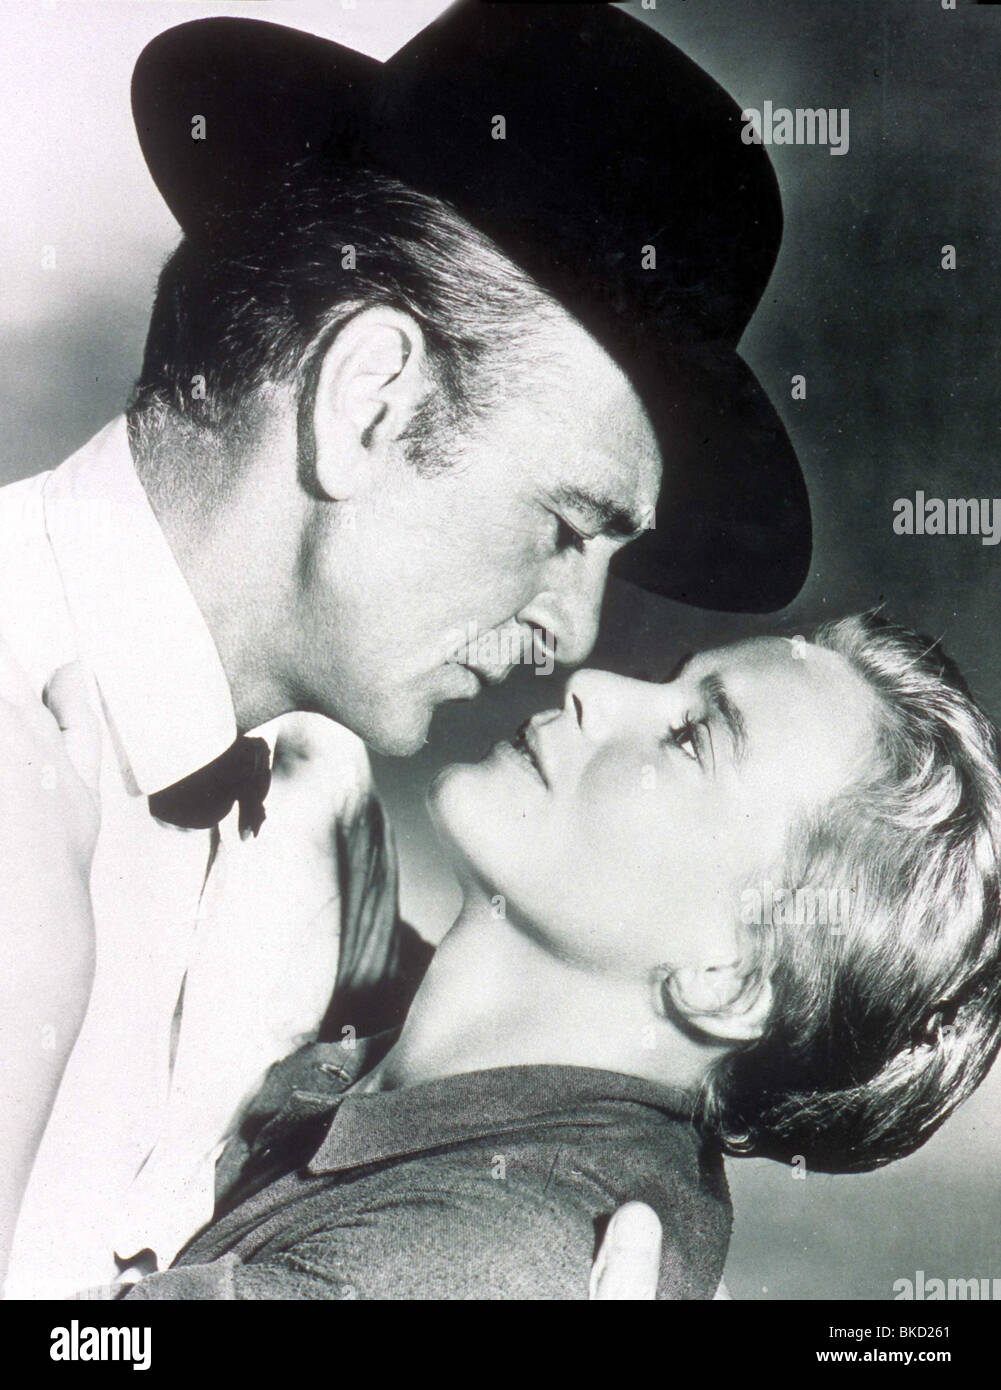 Le HANGING TREE (1959) Gary Cooper, MARIA SCHELL HGTR 001 Banque D'Images